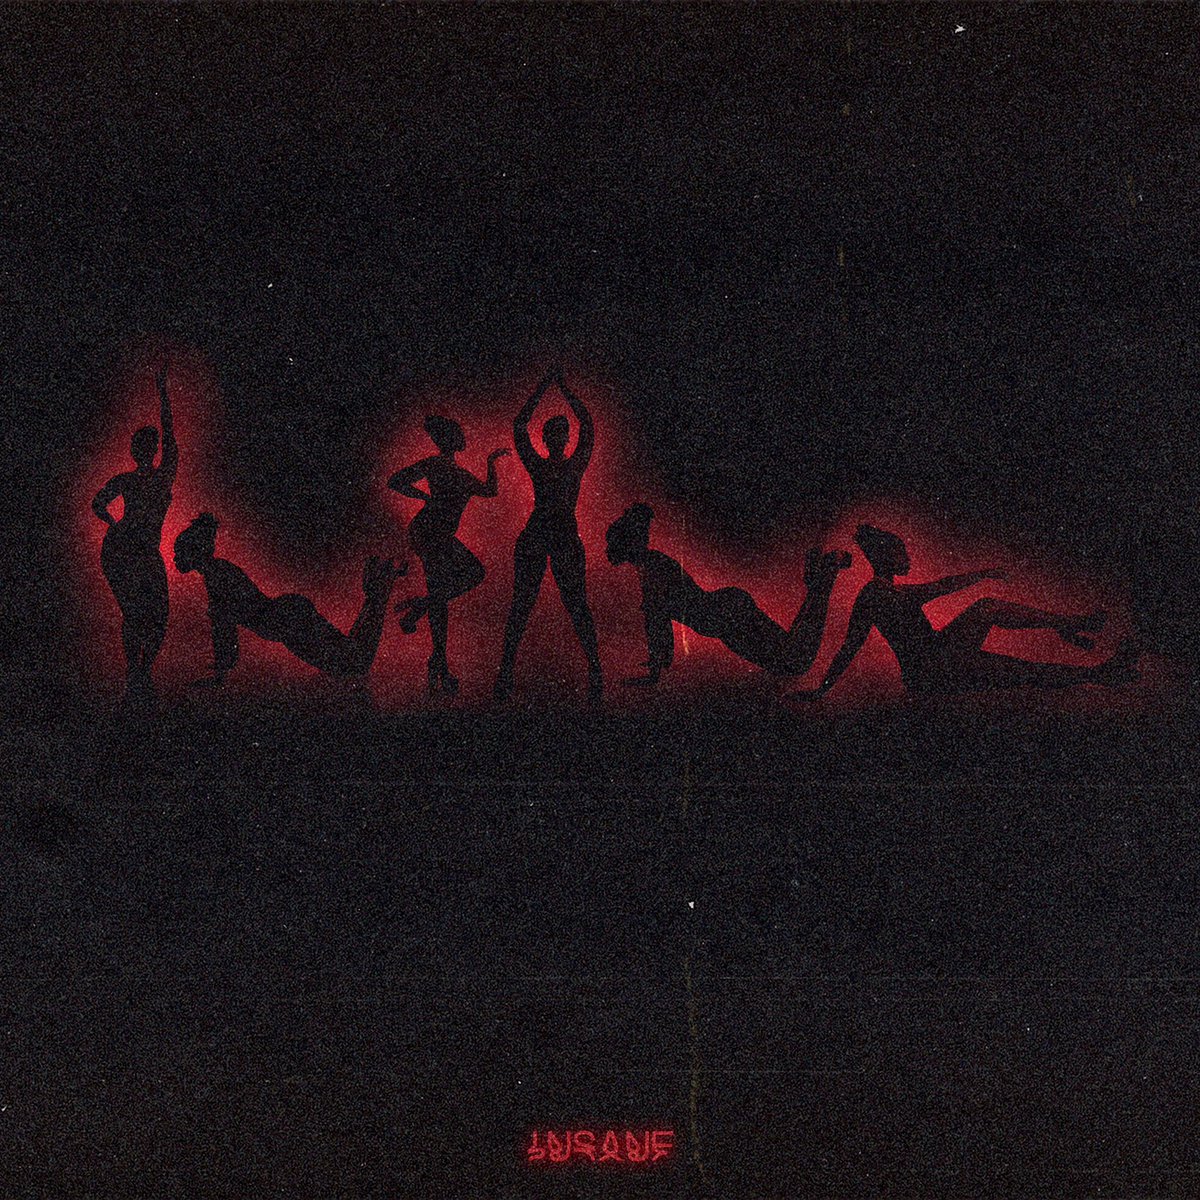 INSANE out on all platforms ❤️🫂 I hope you feel the sexiest!